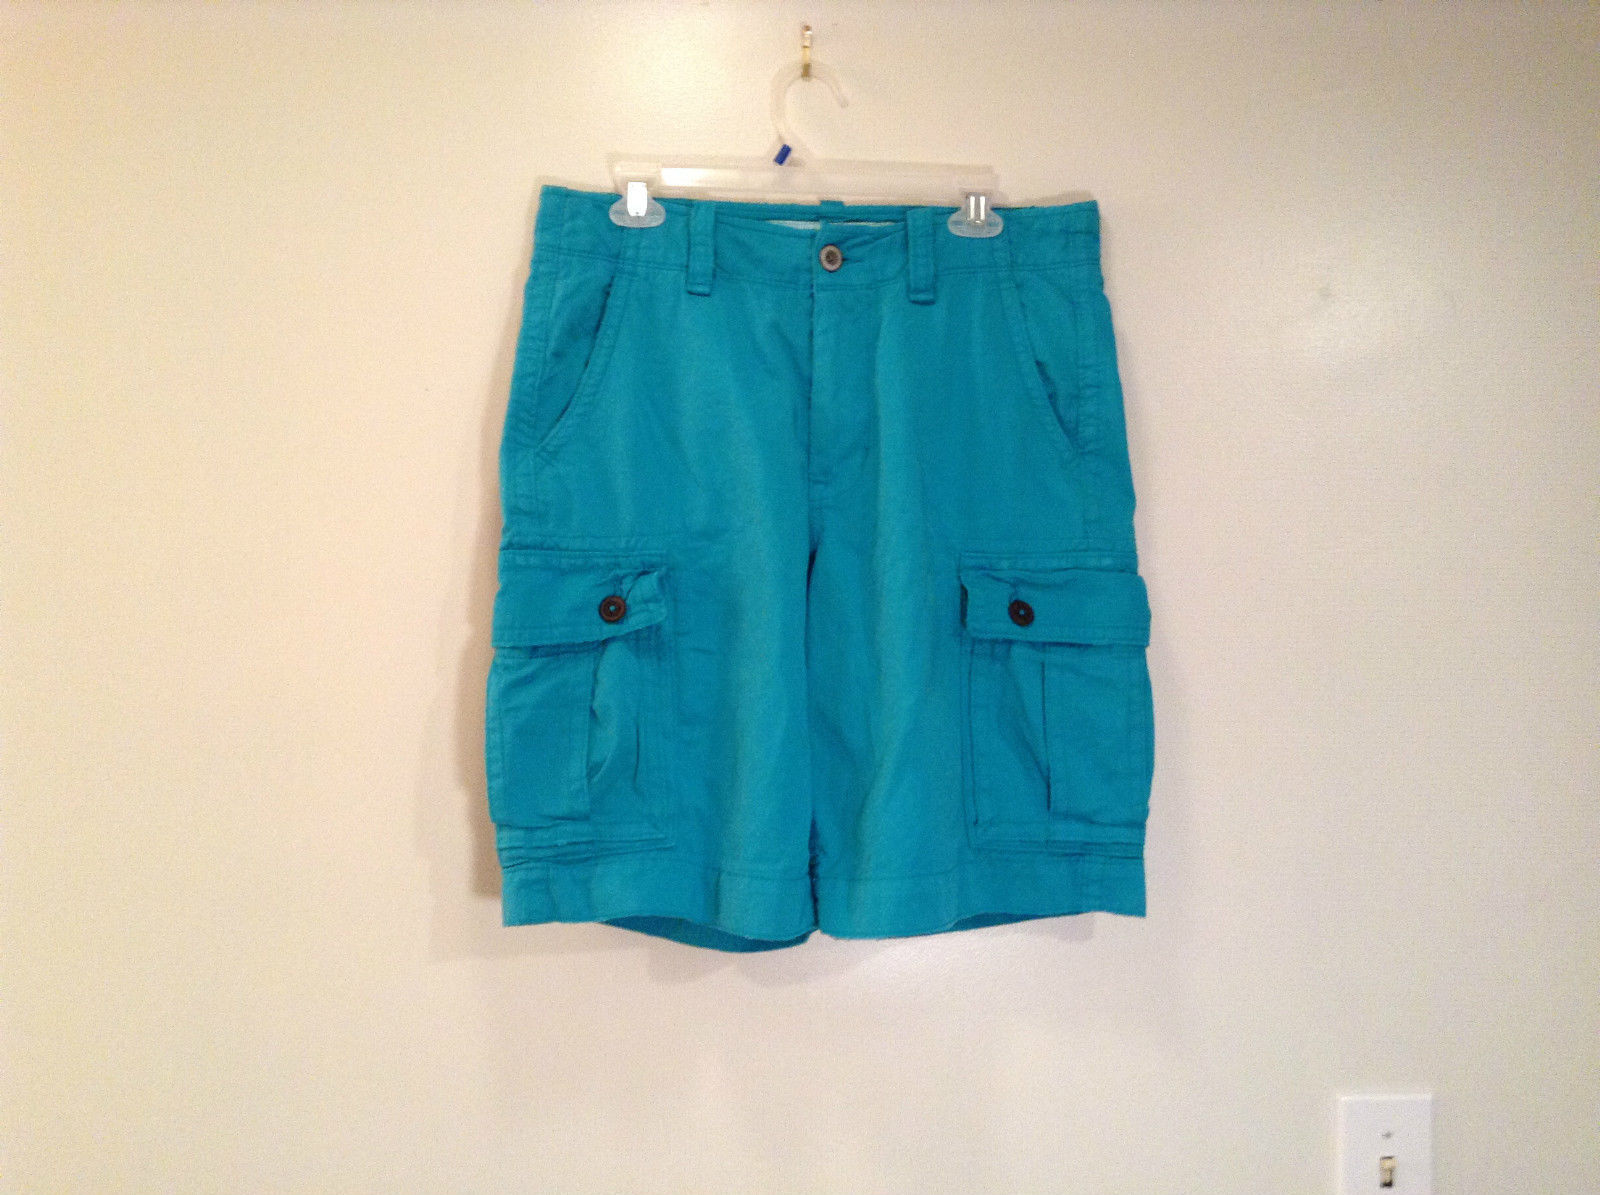 100 Percent Cotton American Eagle Outfitters Turquoise Shorts Sizes 31 - $39.99